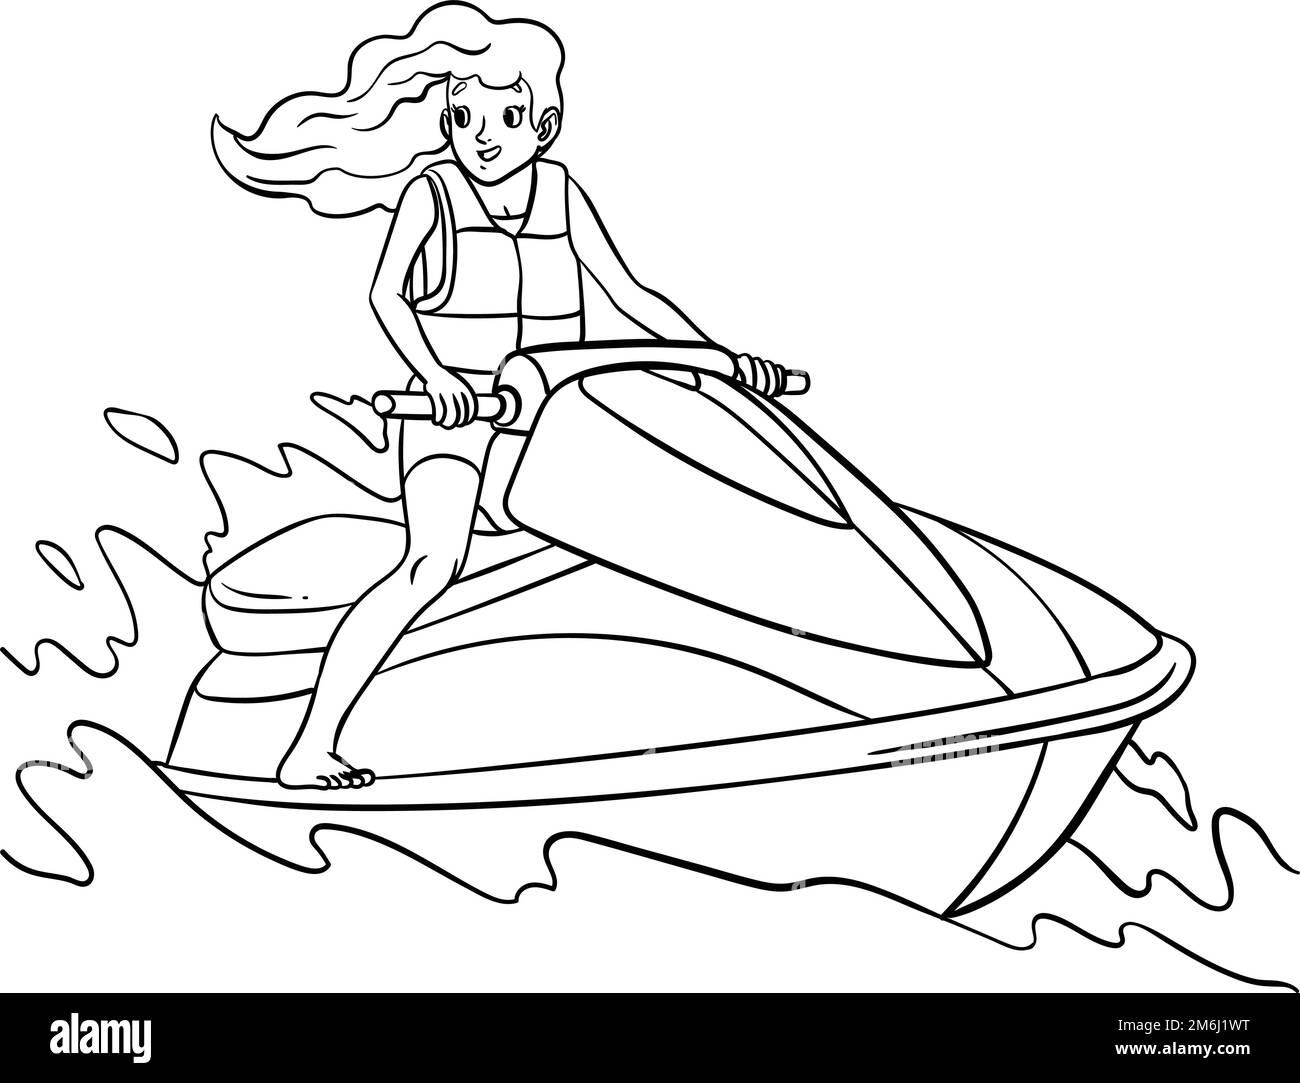 Jet ski isolated coloring page for kids stock vector image art